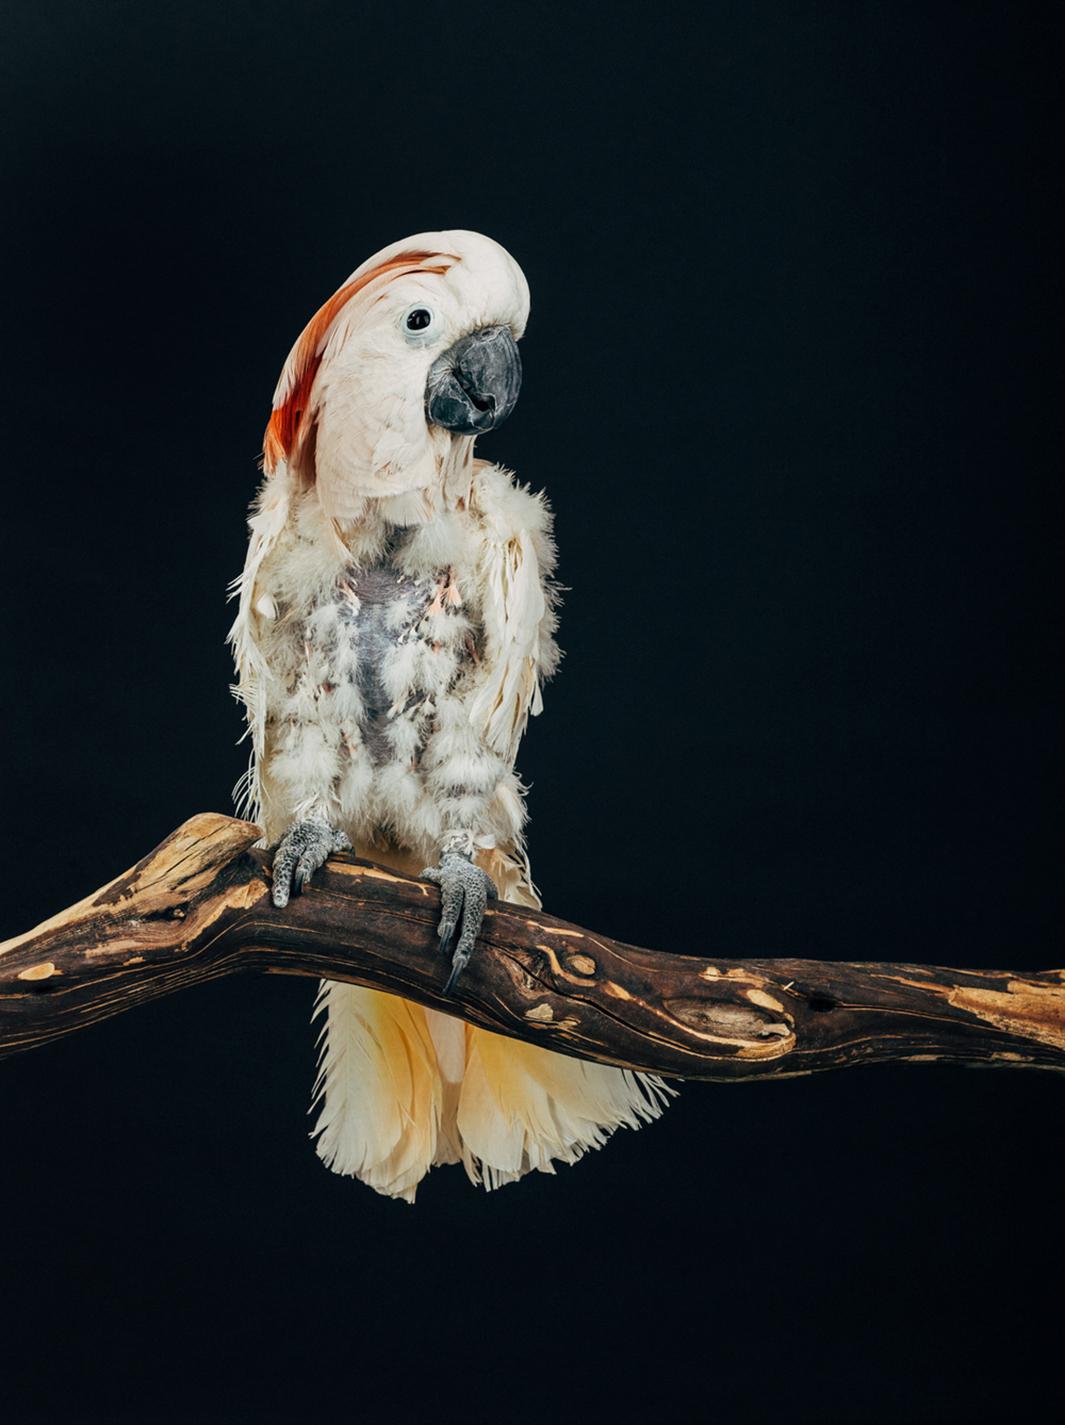 Oliver Regueiro: Earthbound is a birds sanctuaries series sheltered exotic in of portraits of